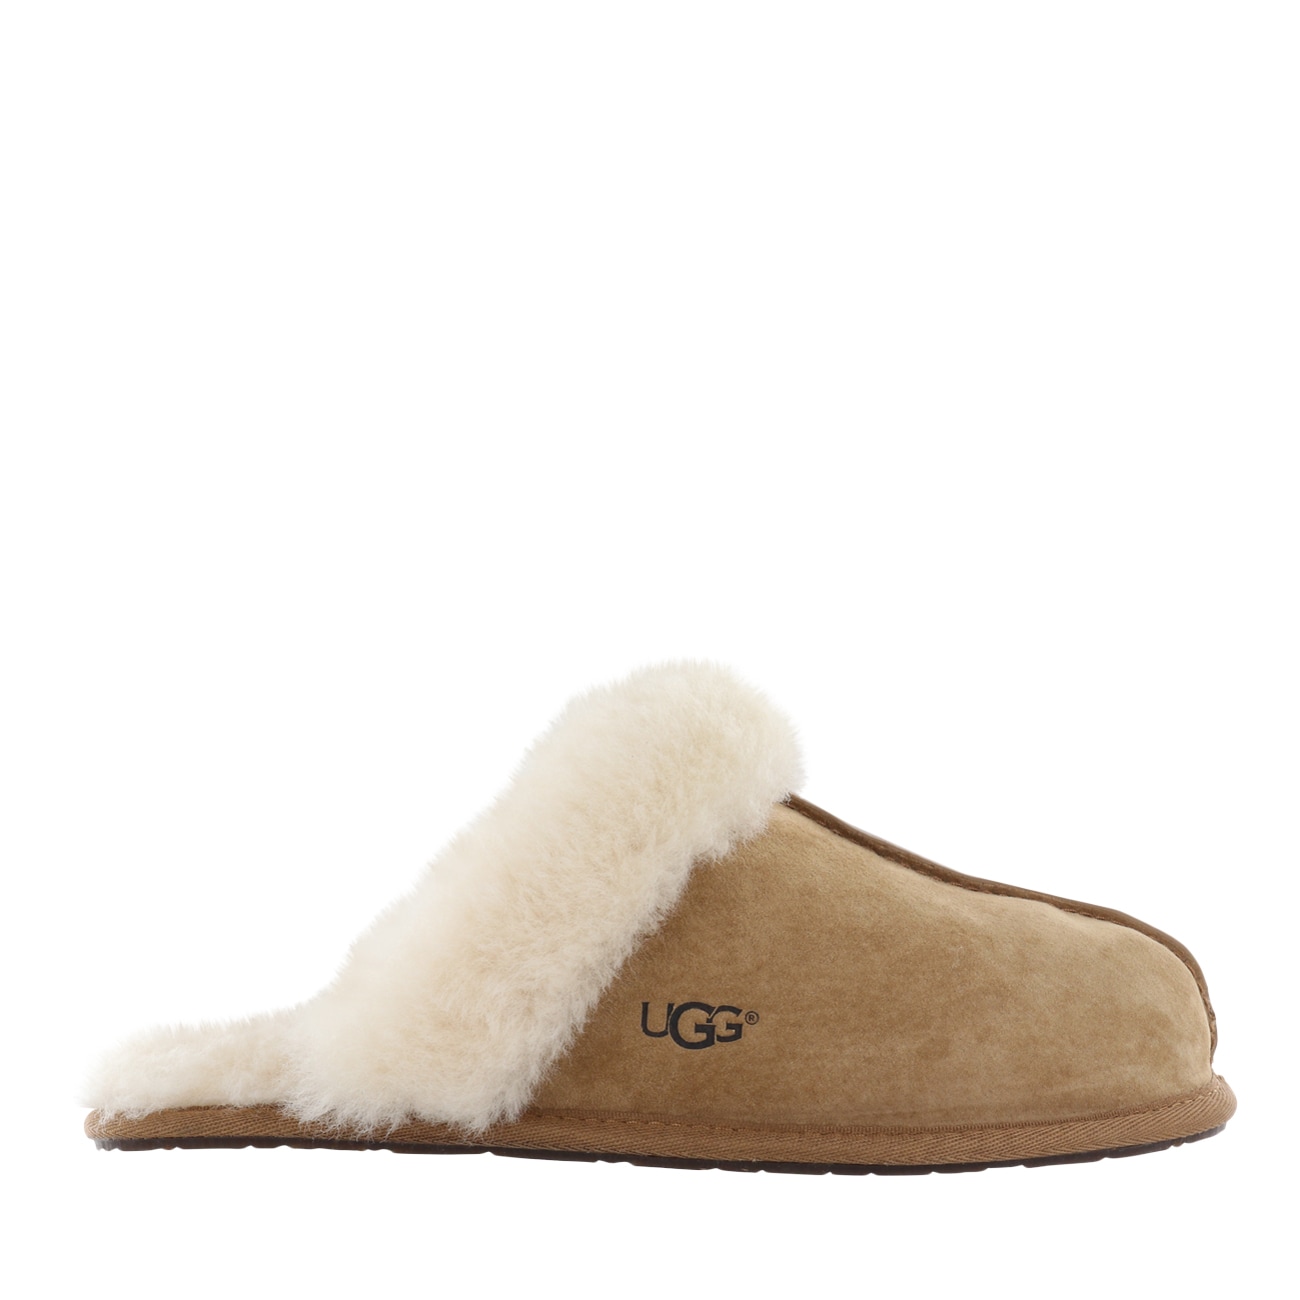 ugg women's slippers size 7